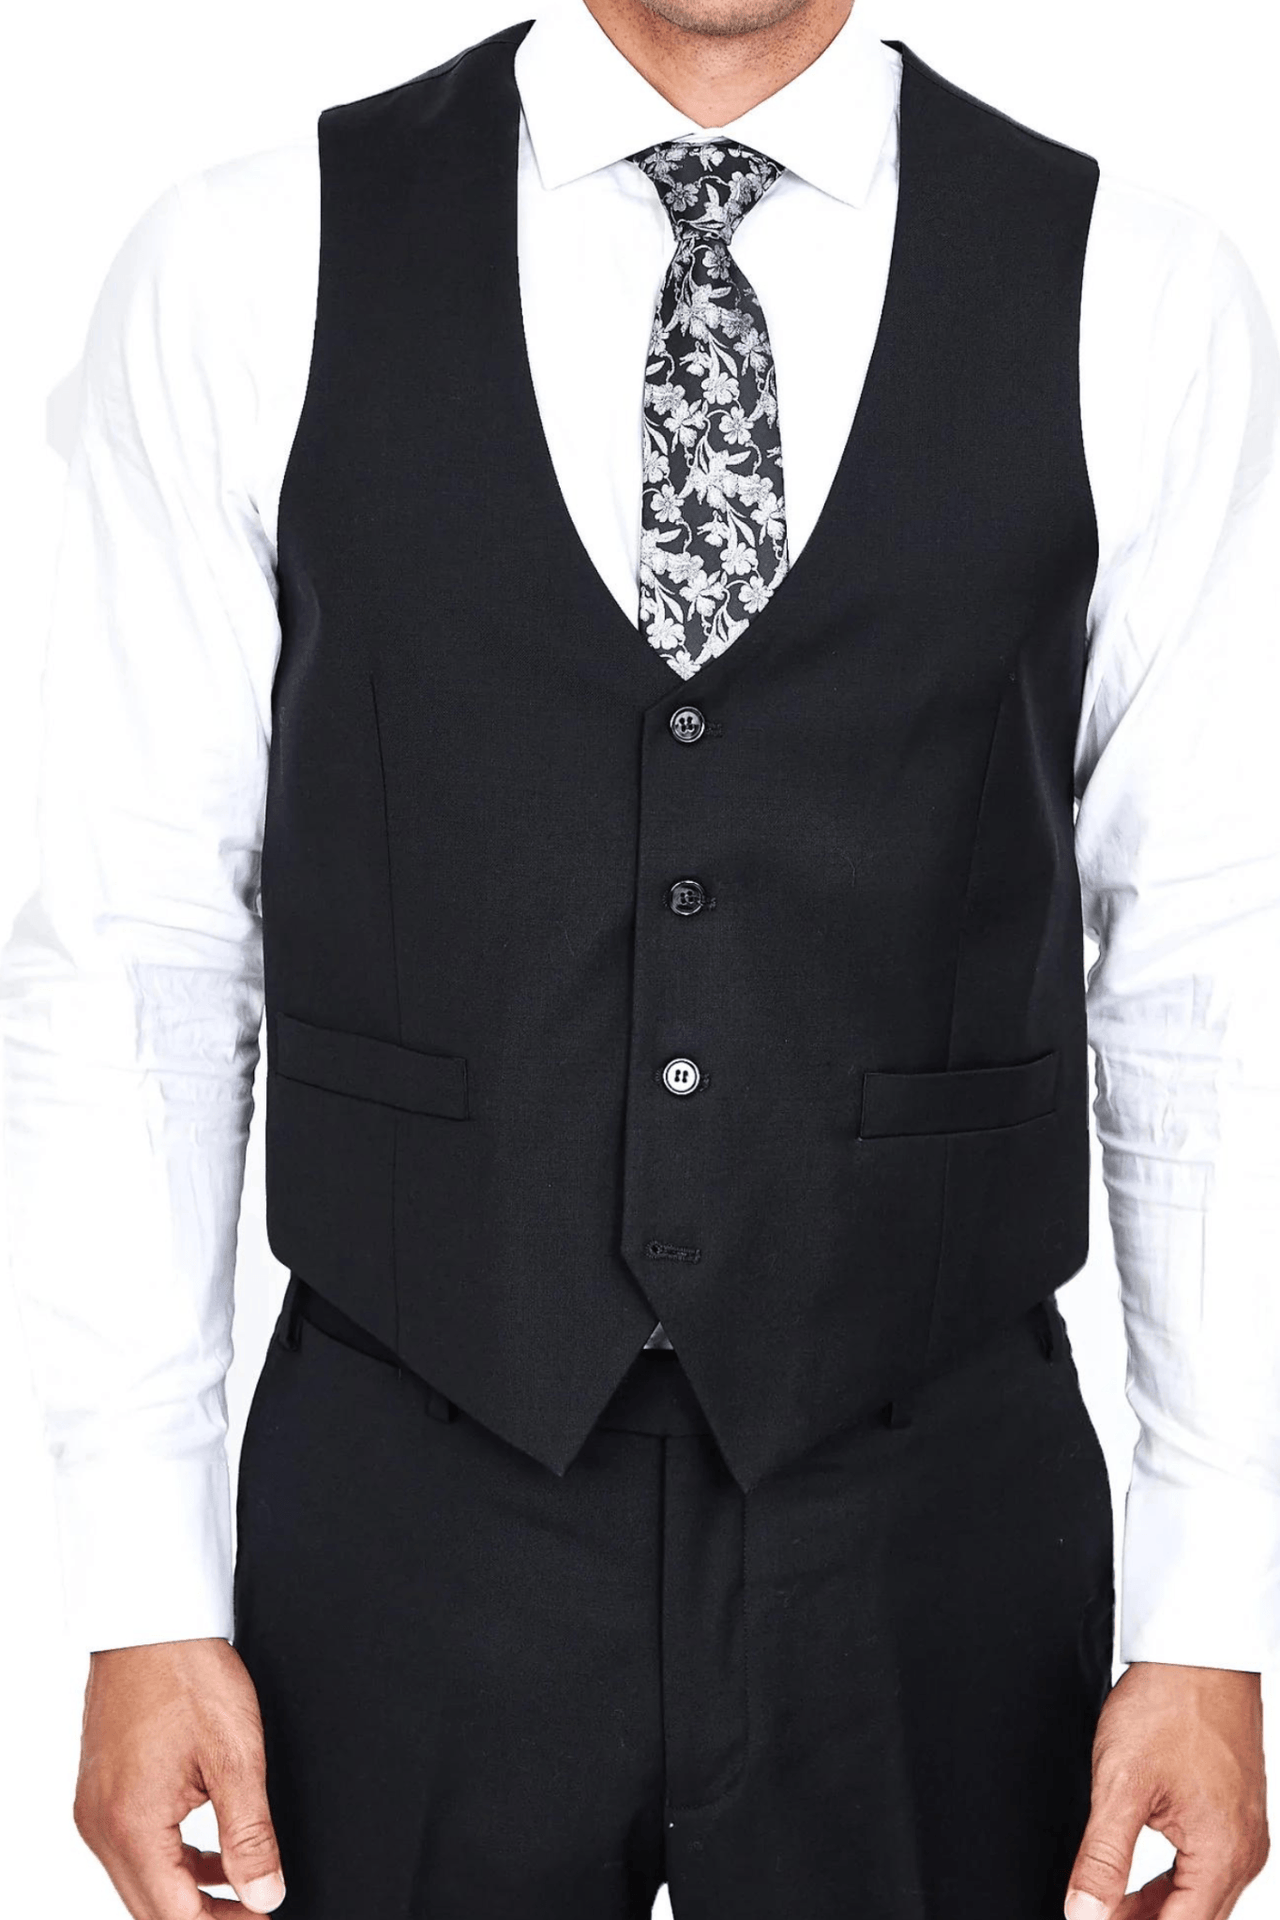 Low Cut Black Luxurious Italian Wool Collection Vest - Tomasso Black